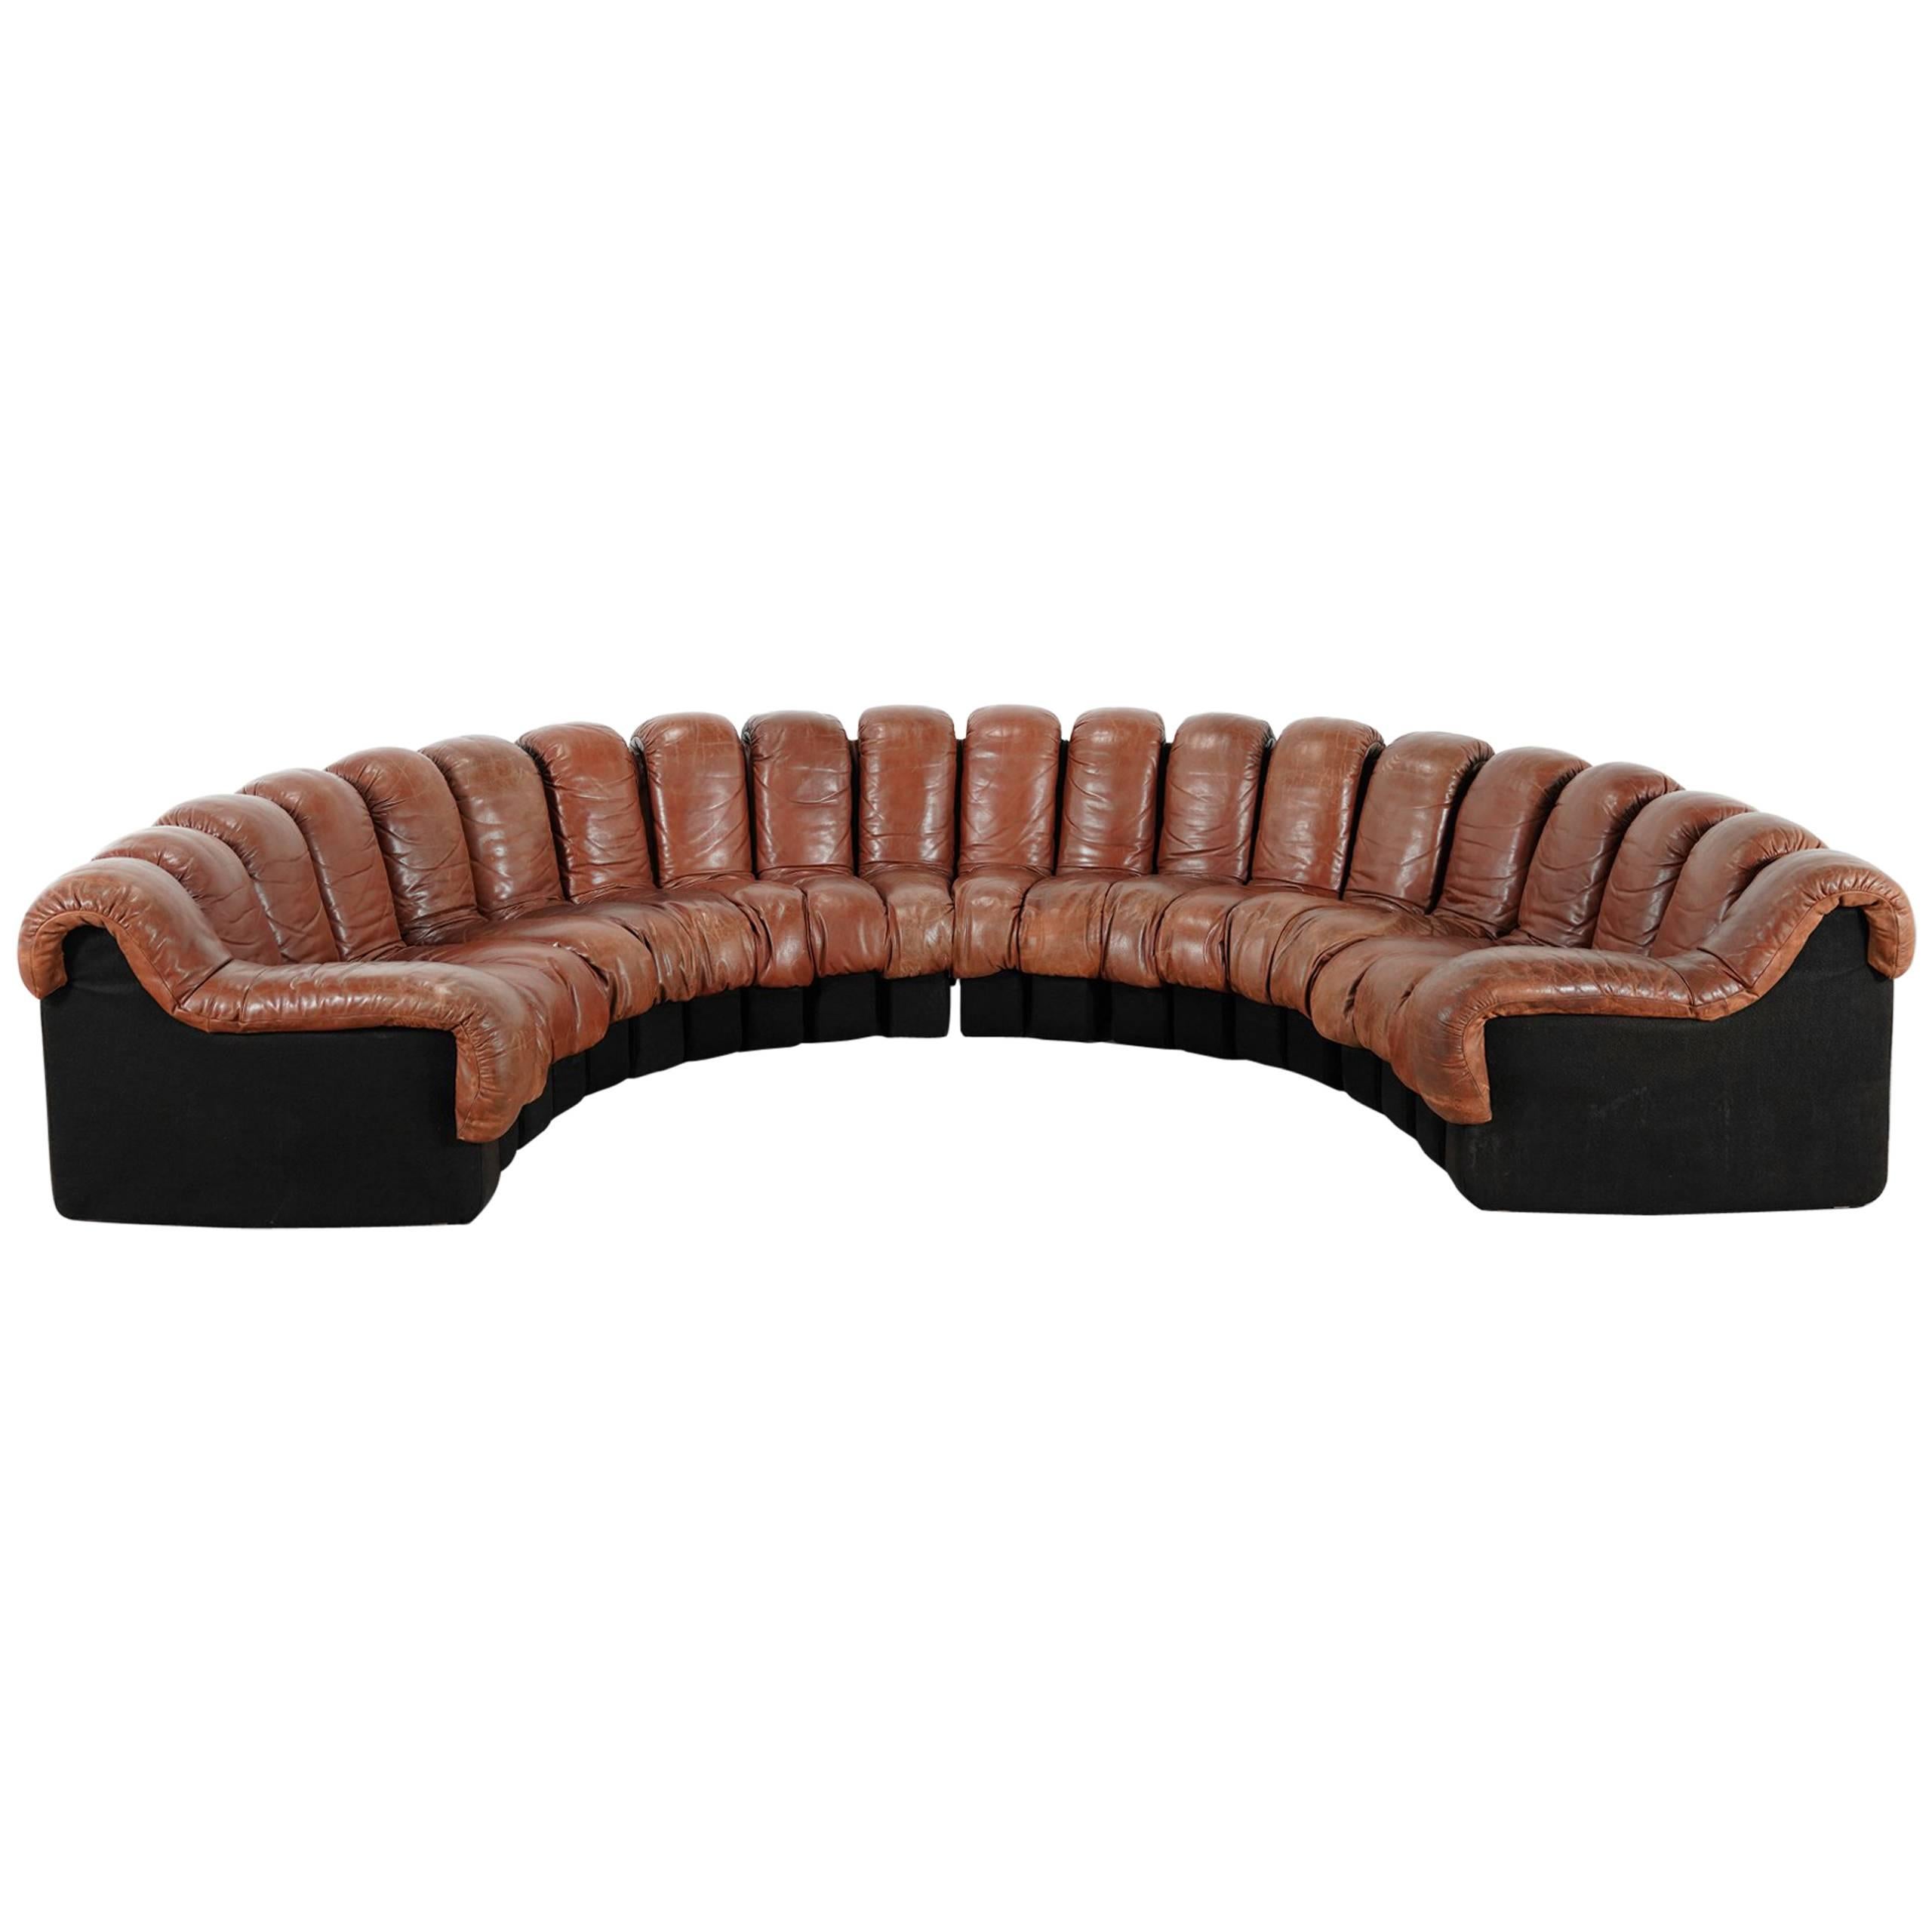 De Sede Ds 600 Sofa by Ueli Berger and Riva 1972, Chocolate Leather 20 Elements